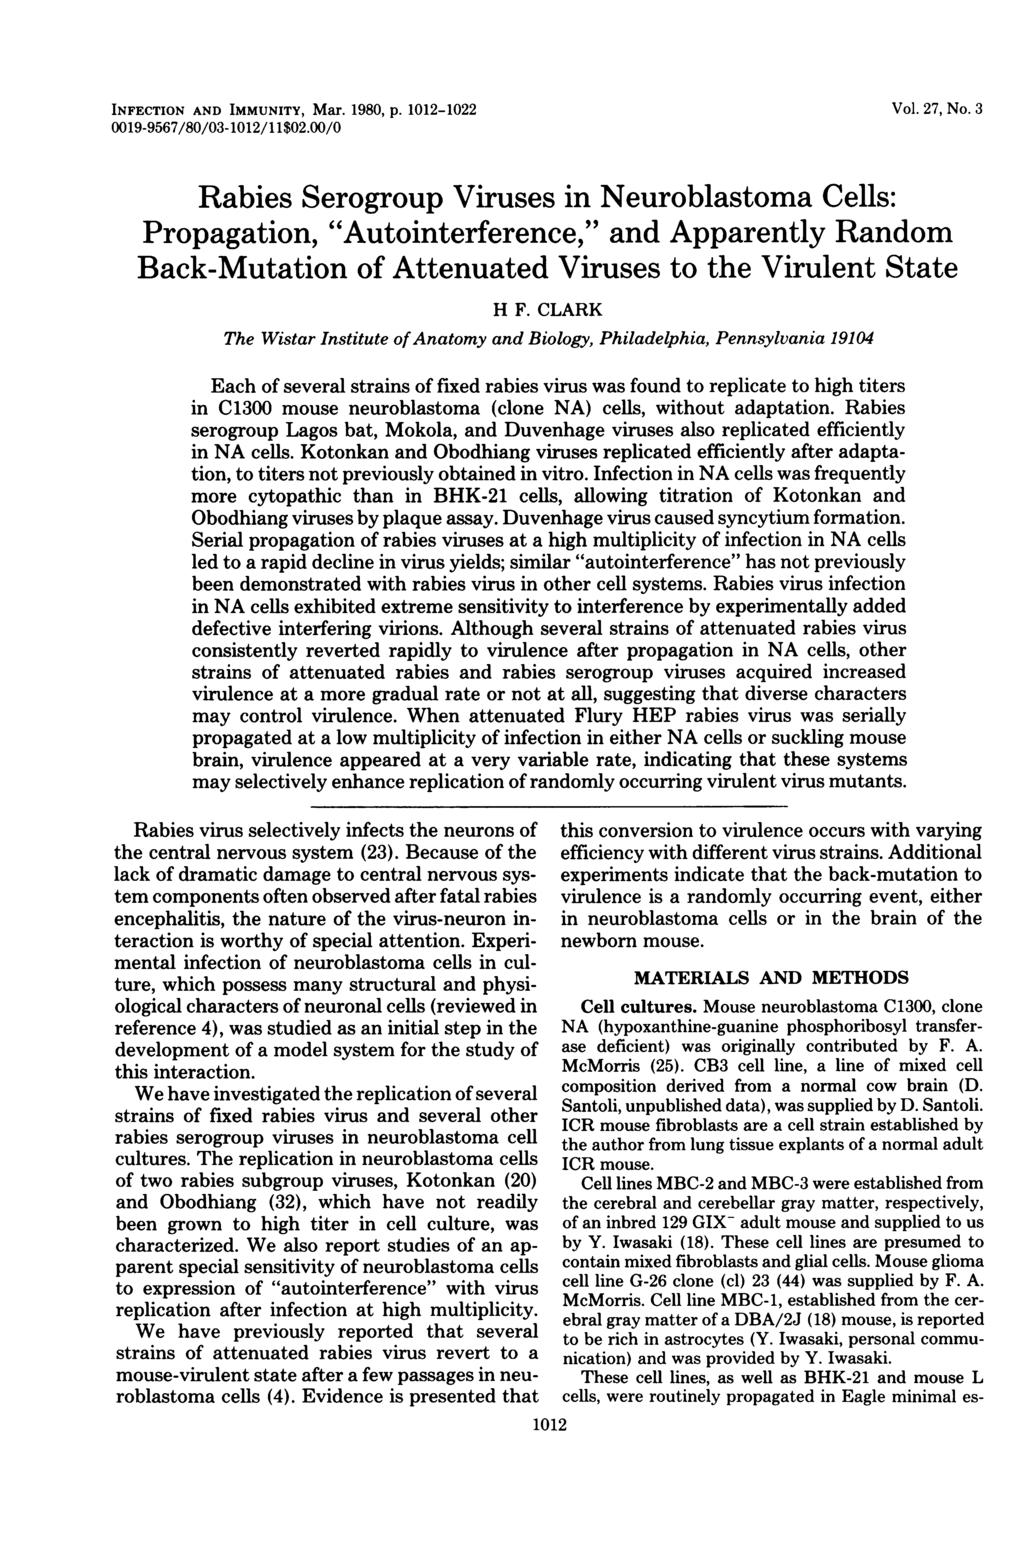 INFECTION AND IMMUNITY, Mar. 1980, p. 101-10 Vol. 7, No. 3 0019-9567/80/03-101/11$0.